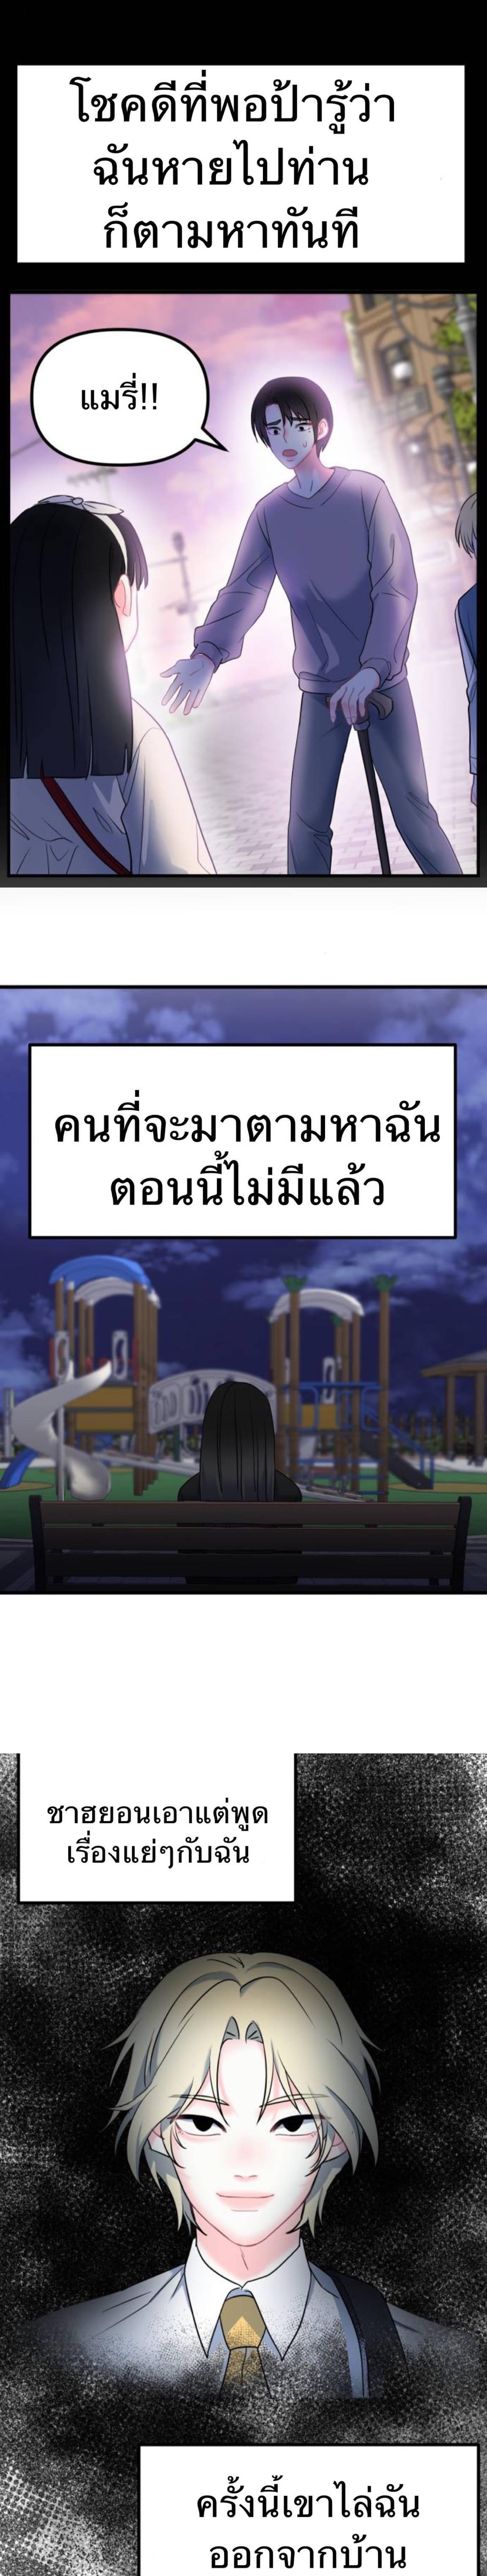 Mary’s Burning Circuit of Happiness ตอนที่ 7